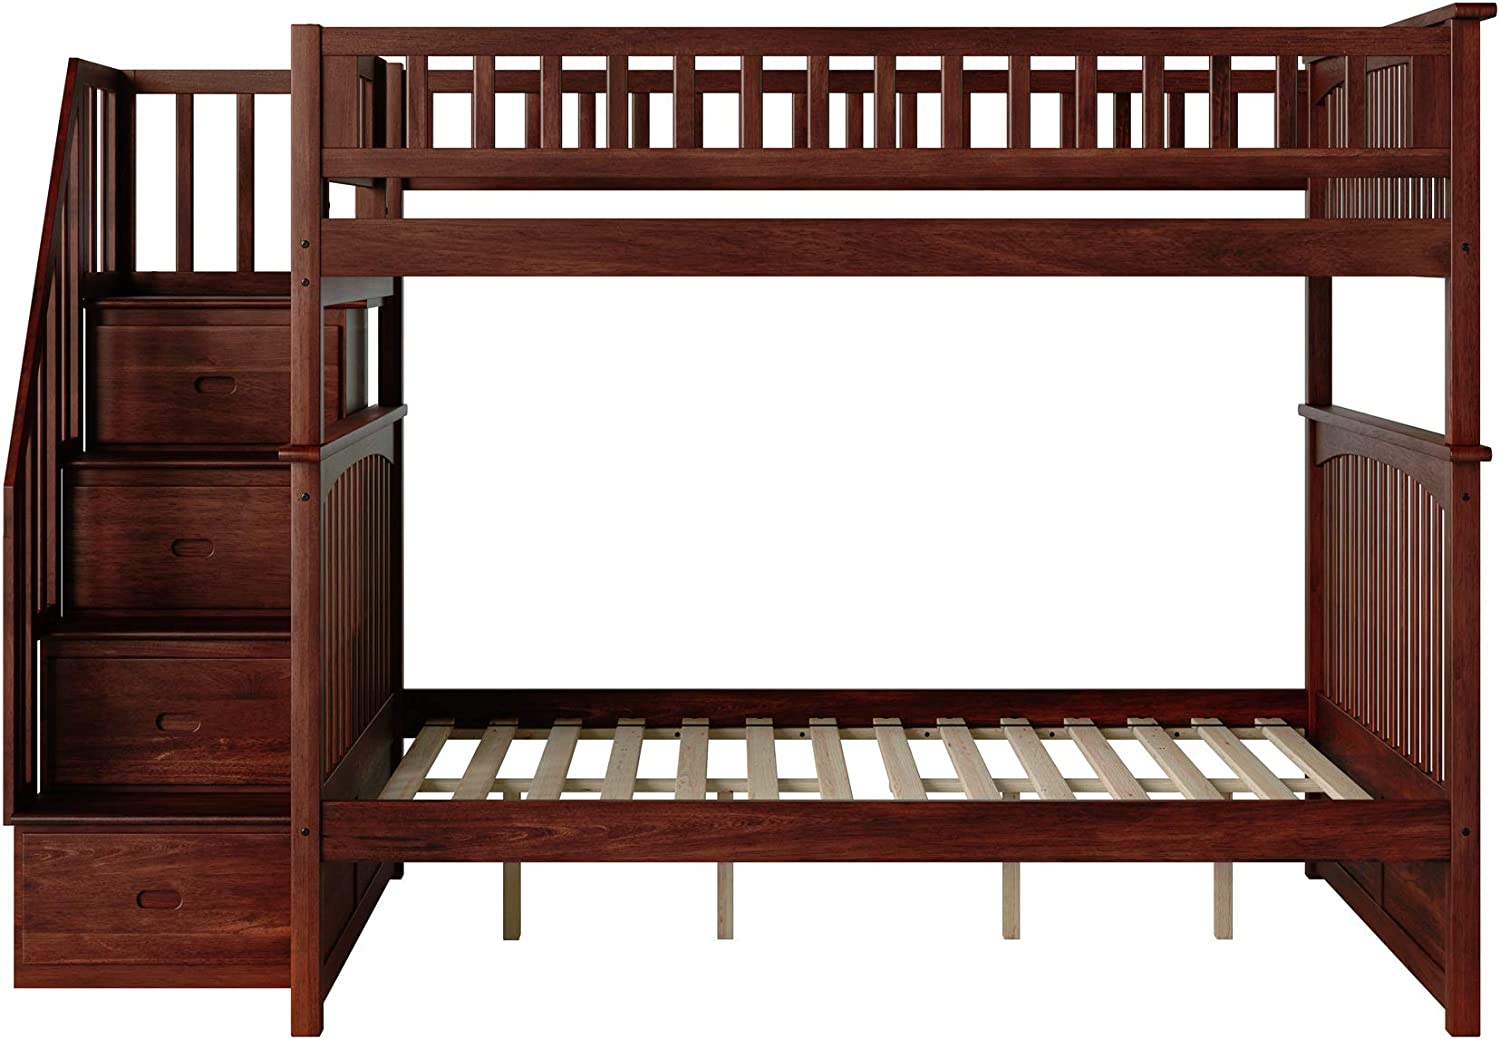 AFI Columbia Staircase Bunk with Turbo Charger, Full Over Full, Walnut